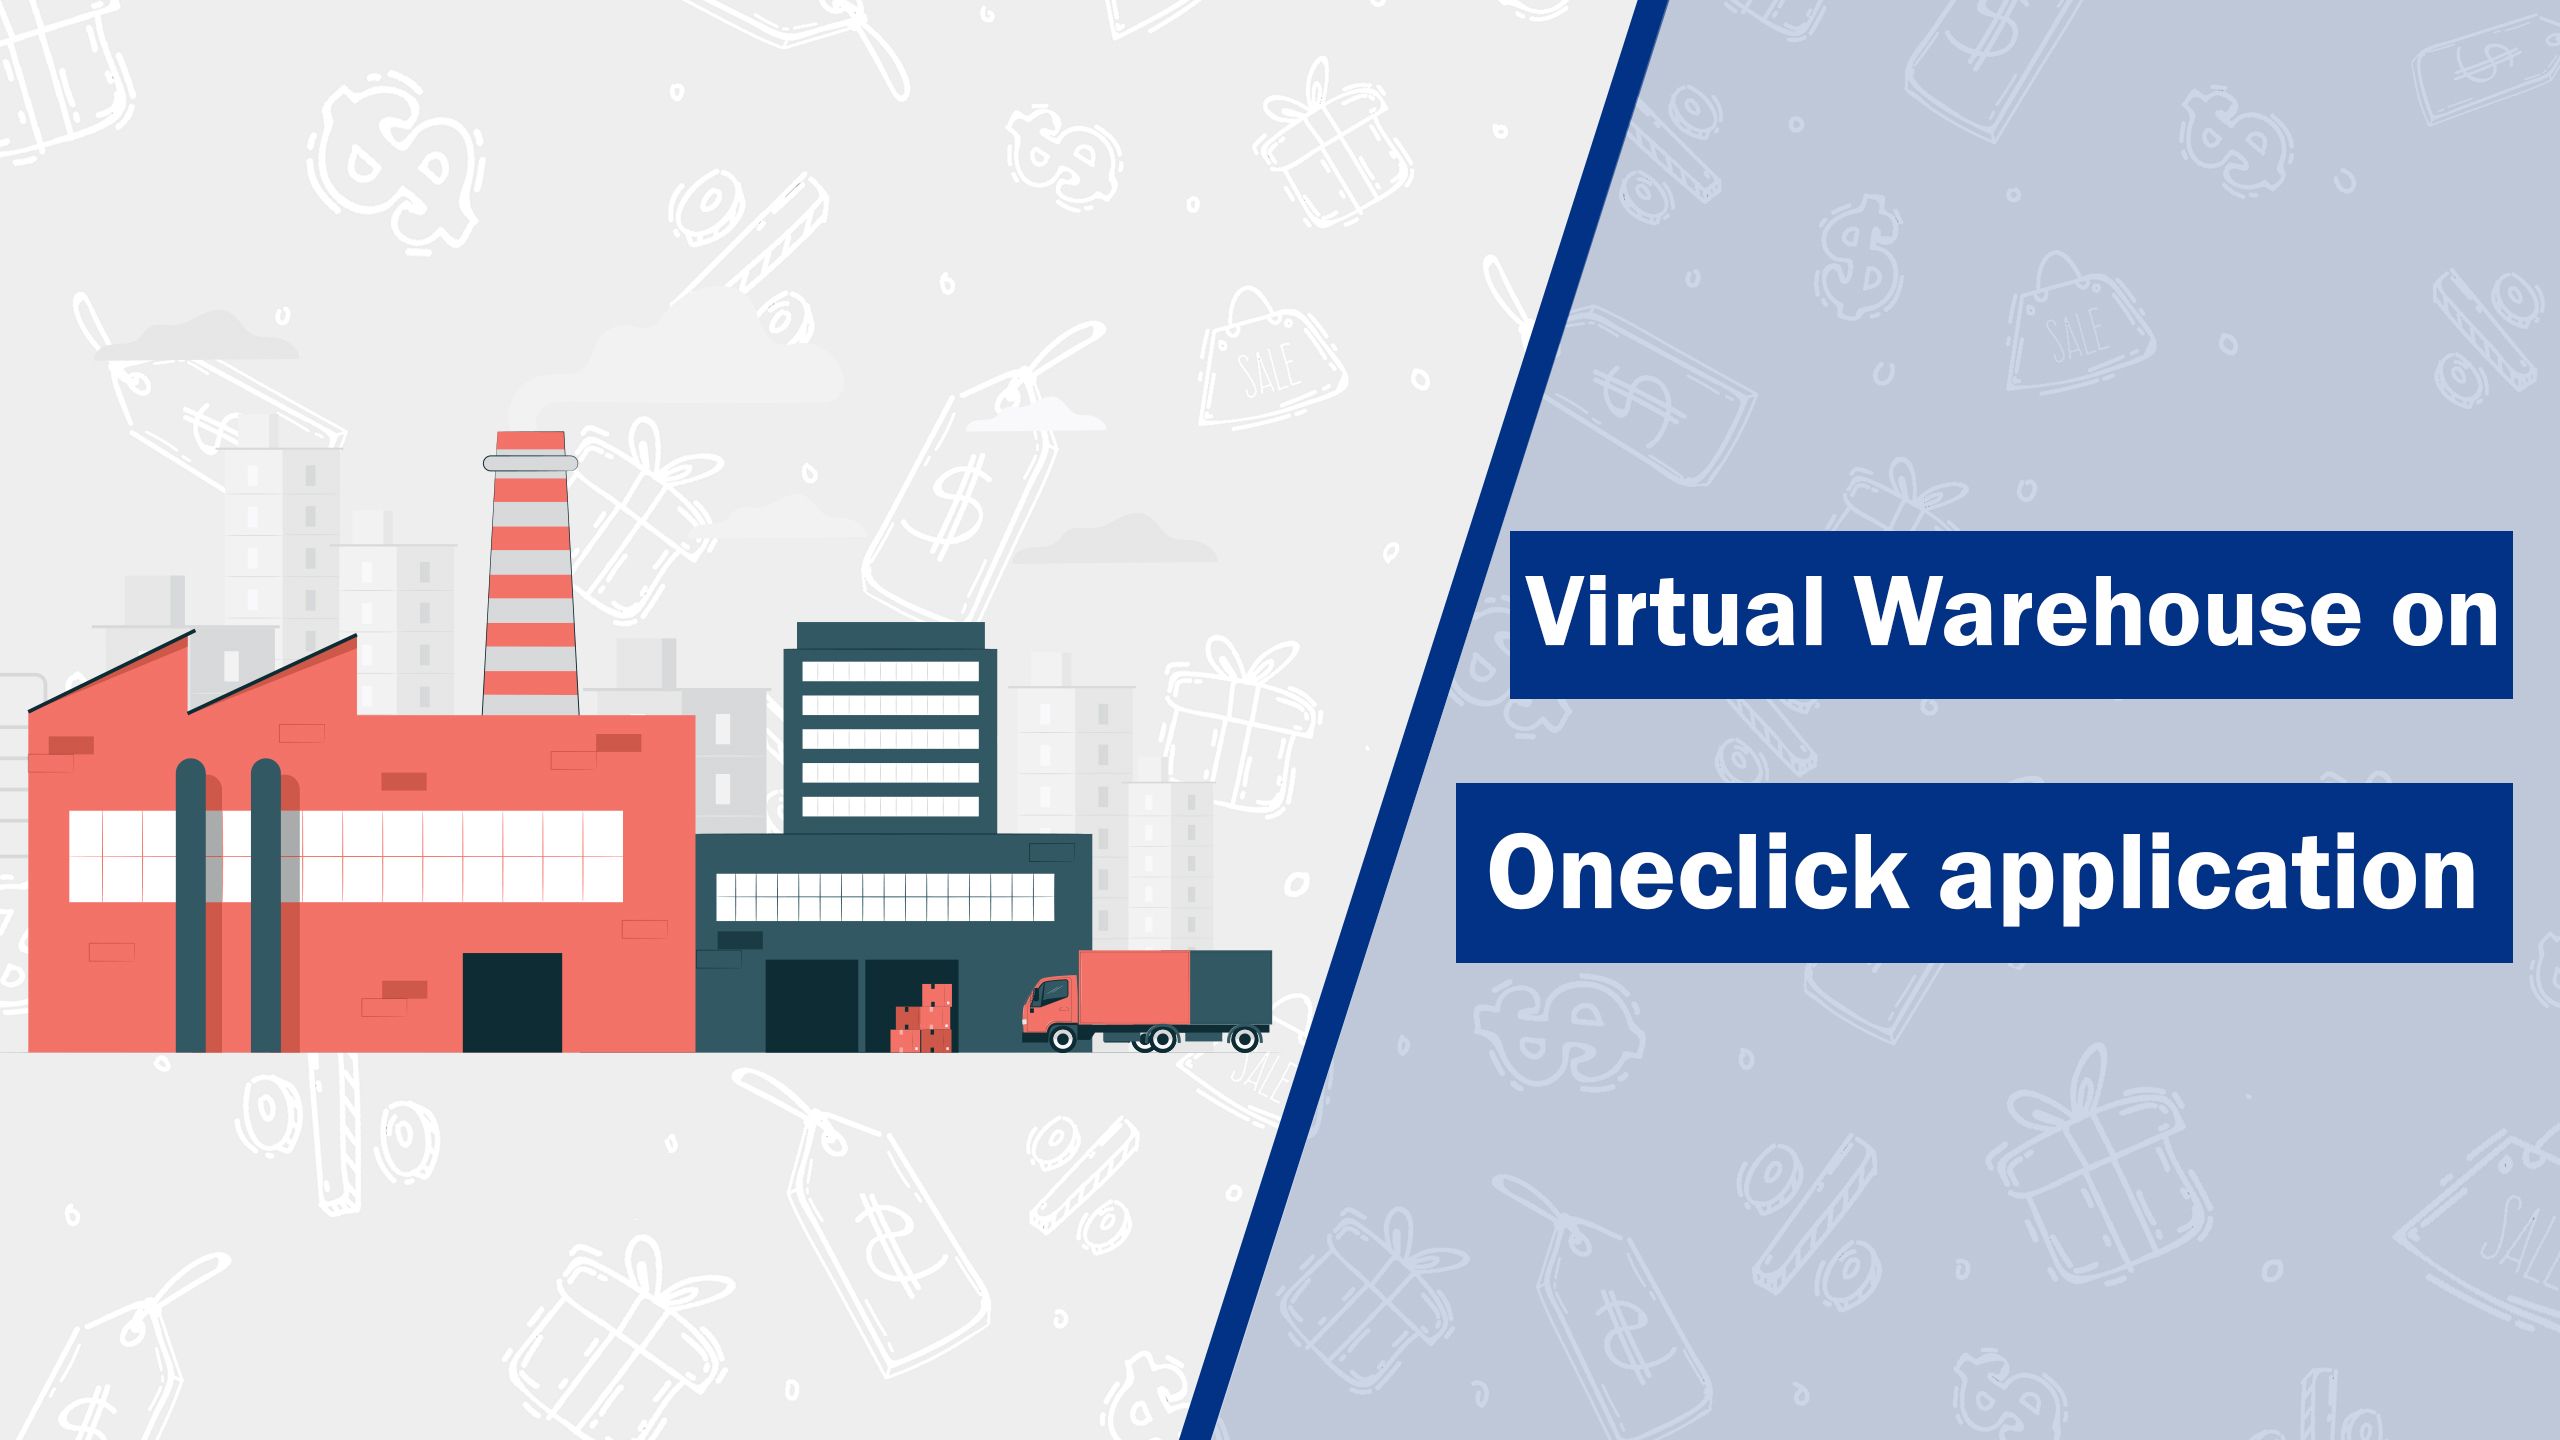 Virtual Warehouse on ONECLICK App